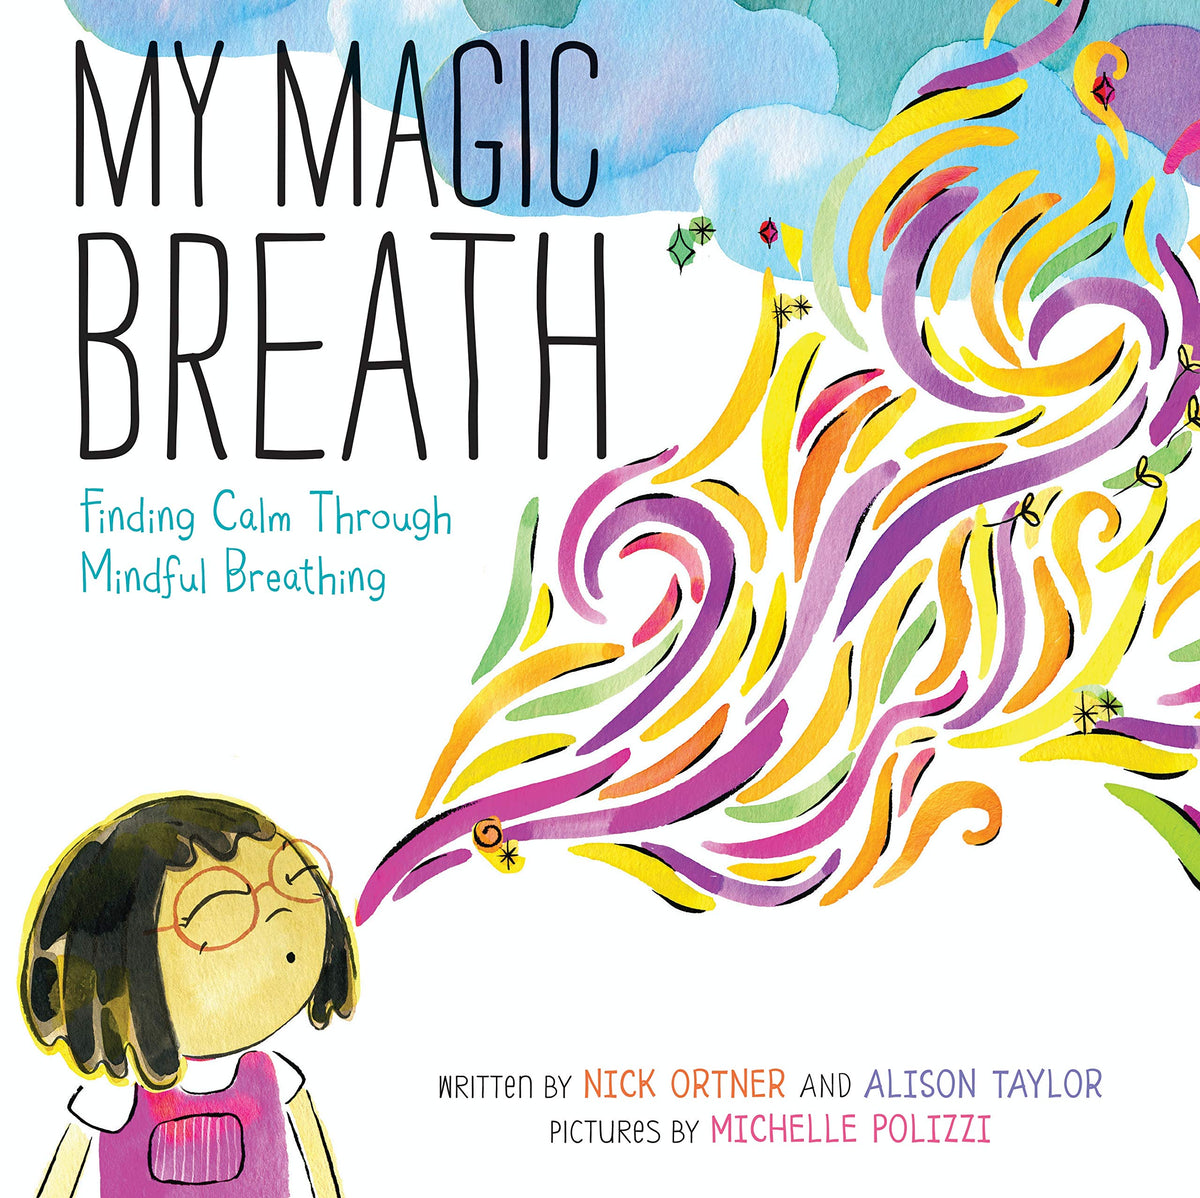 books for kids mental health, books for kids with anxiety, mental health childrens book, books for childrens mental health, children&#39;s book with important message, my magic breath book, finding calm through mindful breathing book